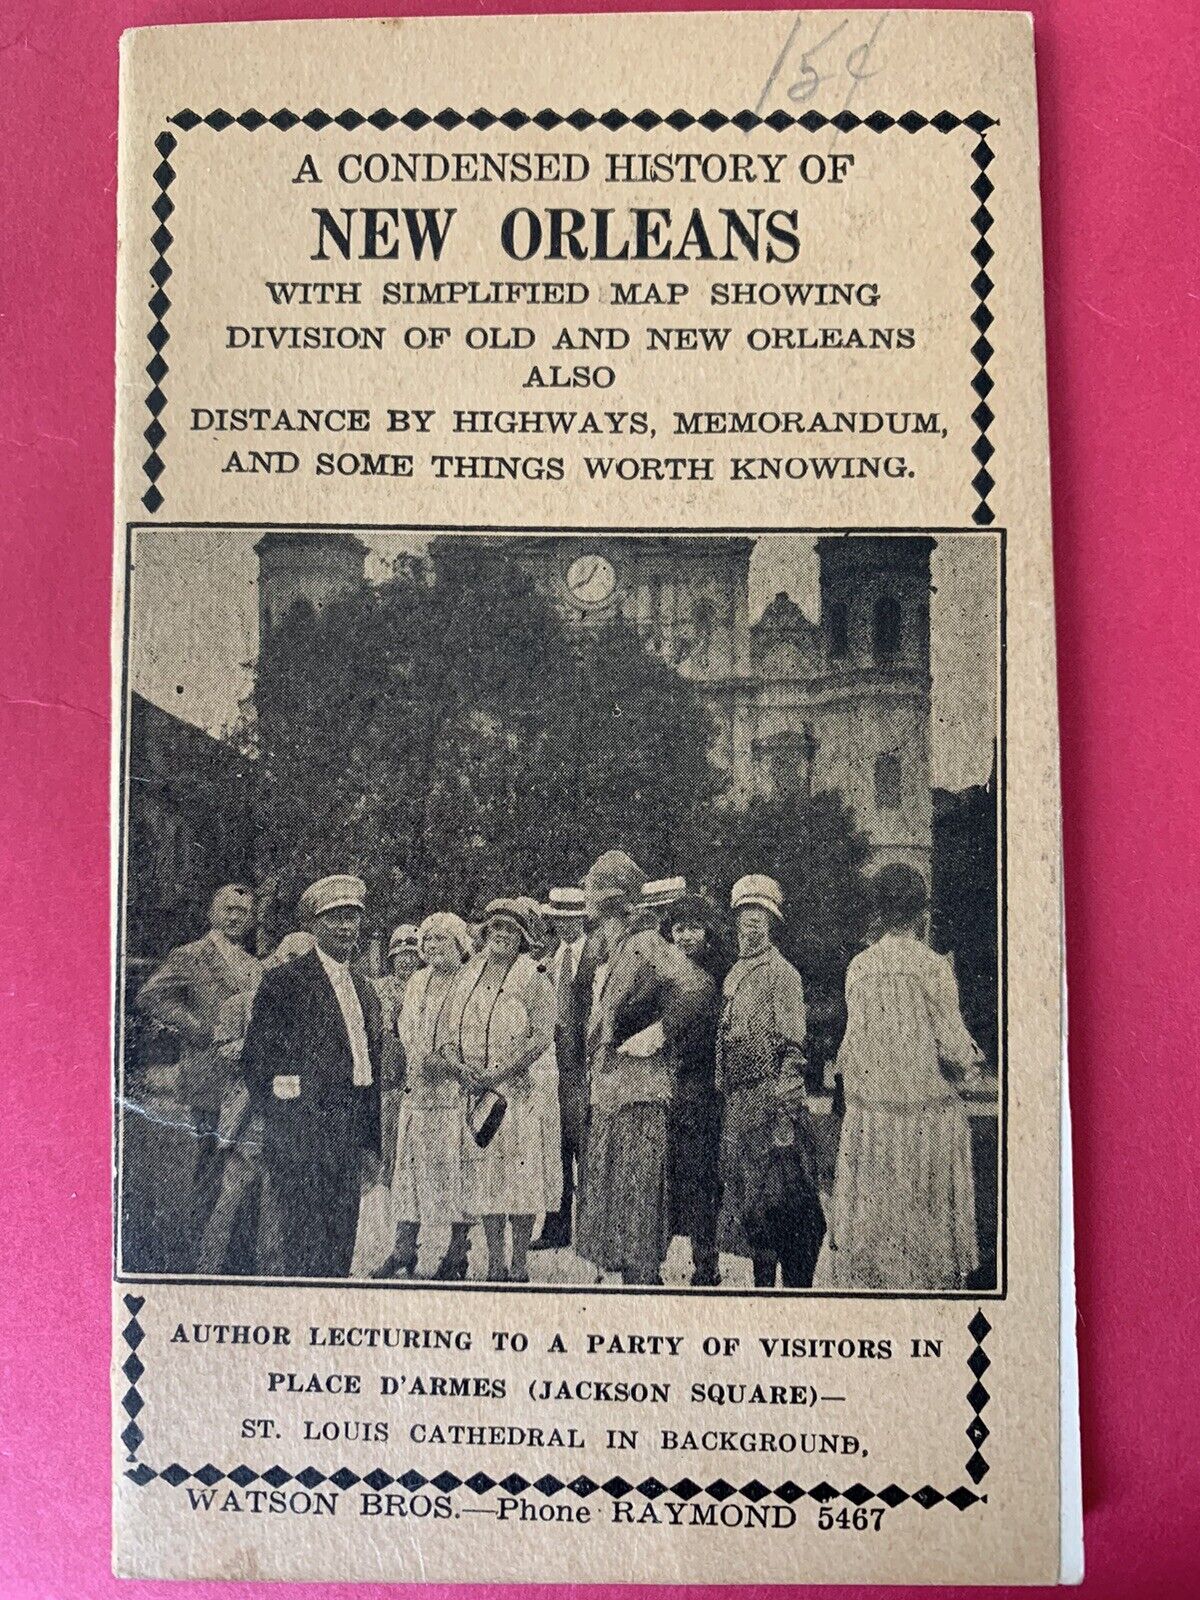 A Condensed History of New Orleans Sight Seeing Handout undated old looking old